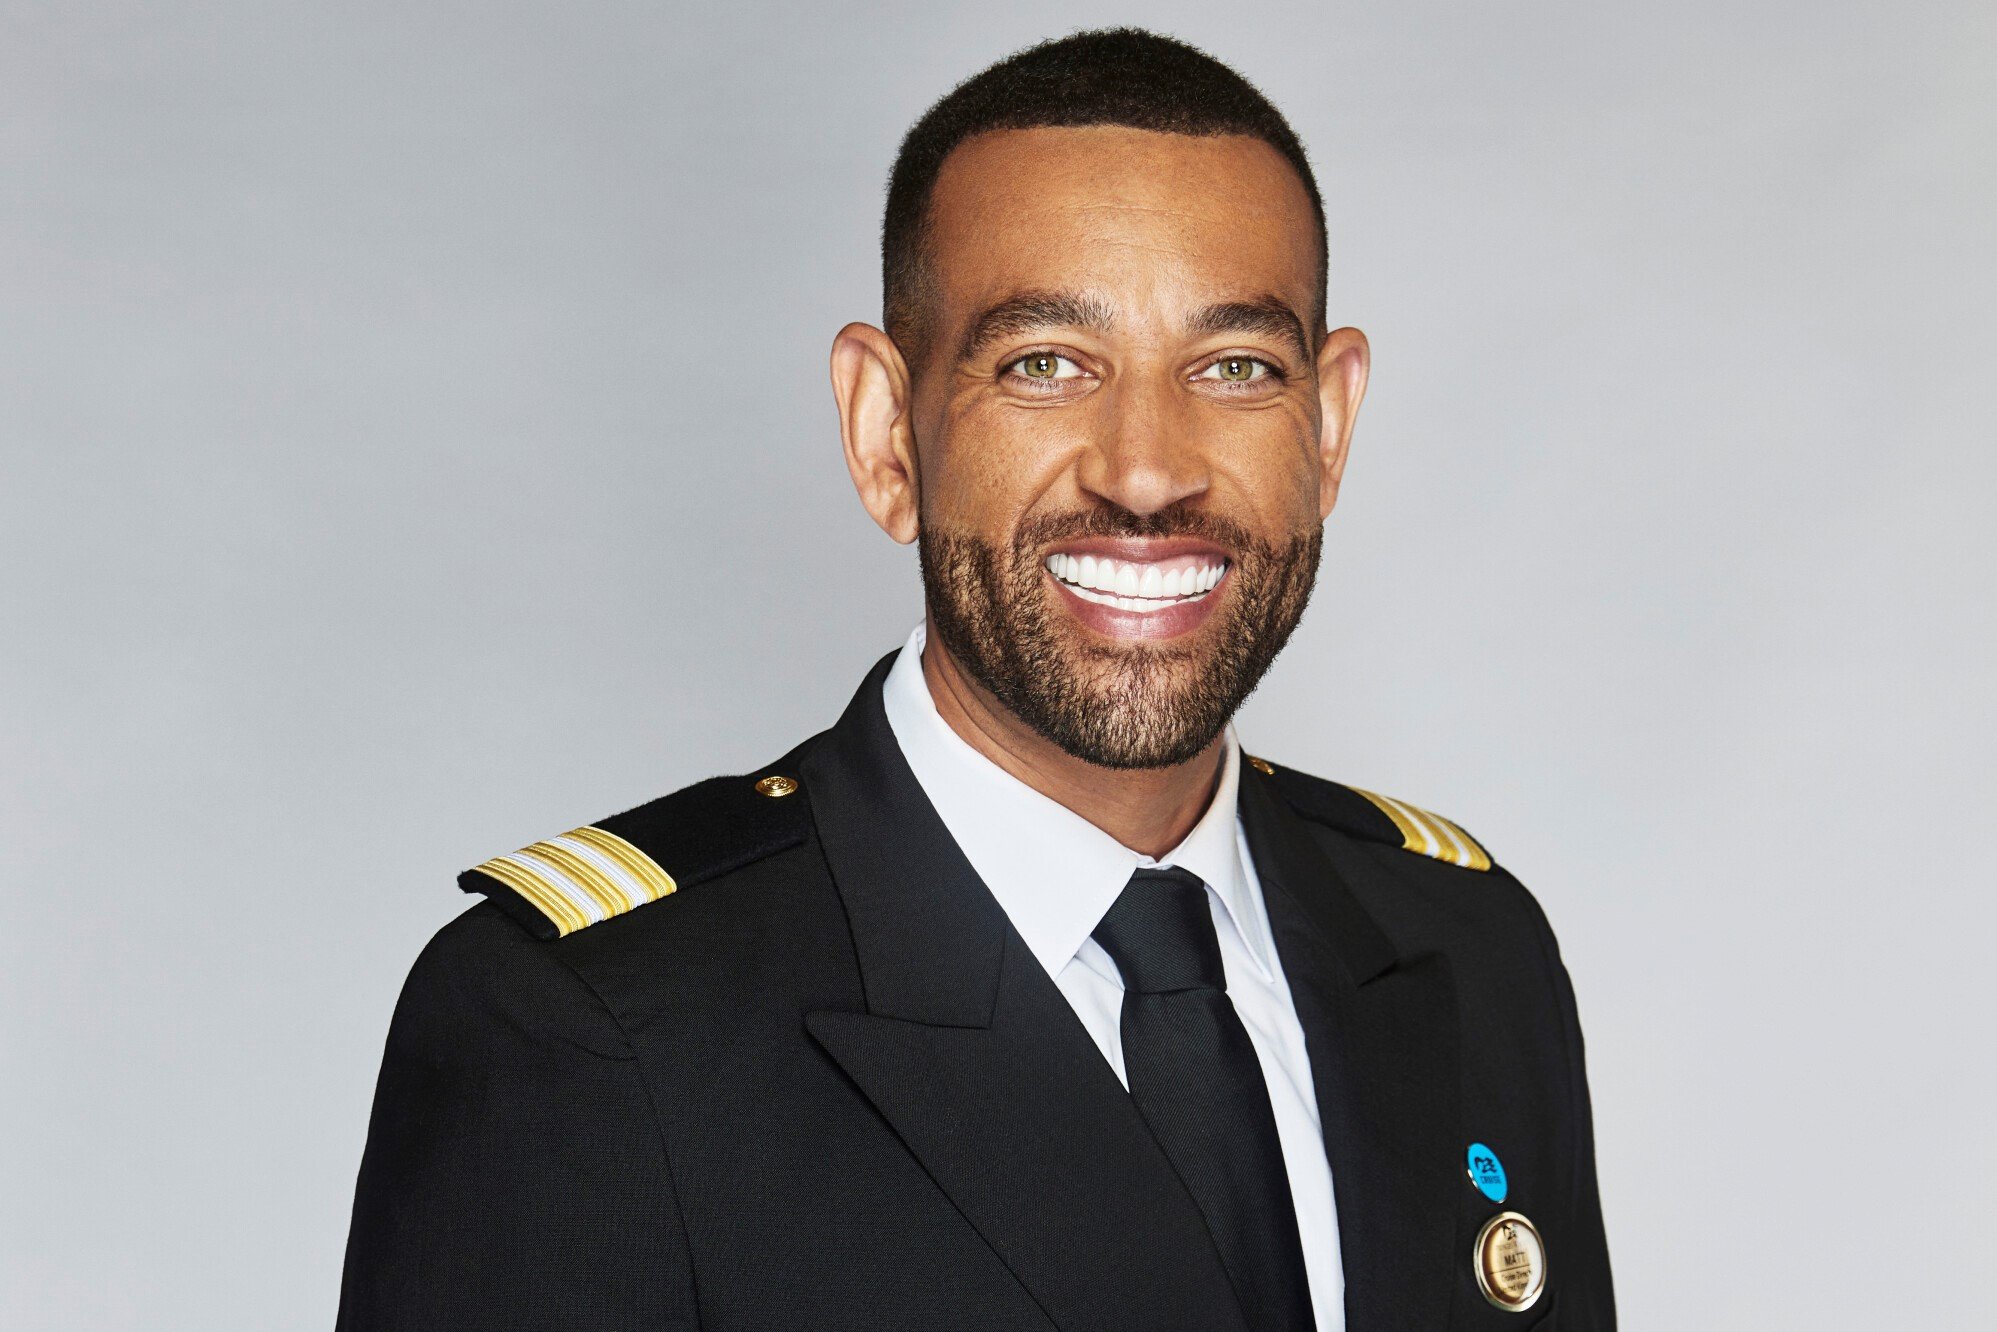 Matt Mitcham, who stars as the cruise director in 'The Real Love Boat' on CBS, wears his black and white suit uniform.